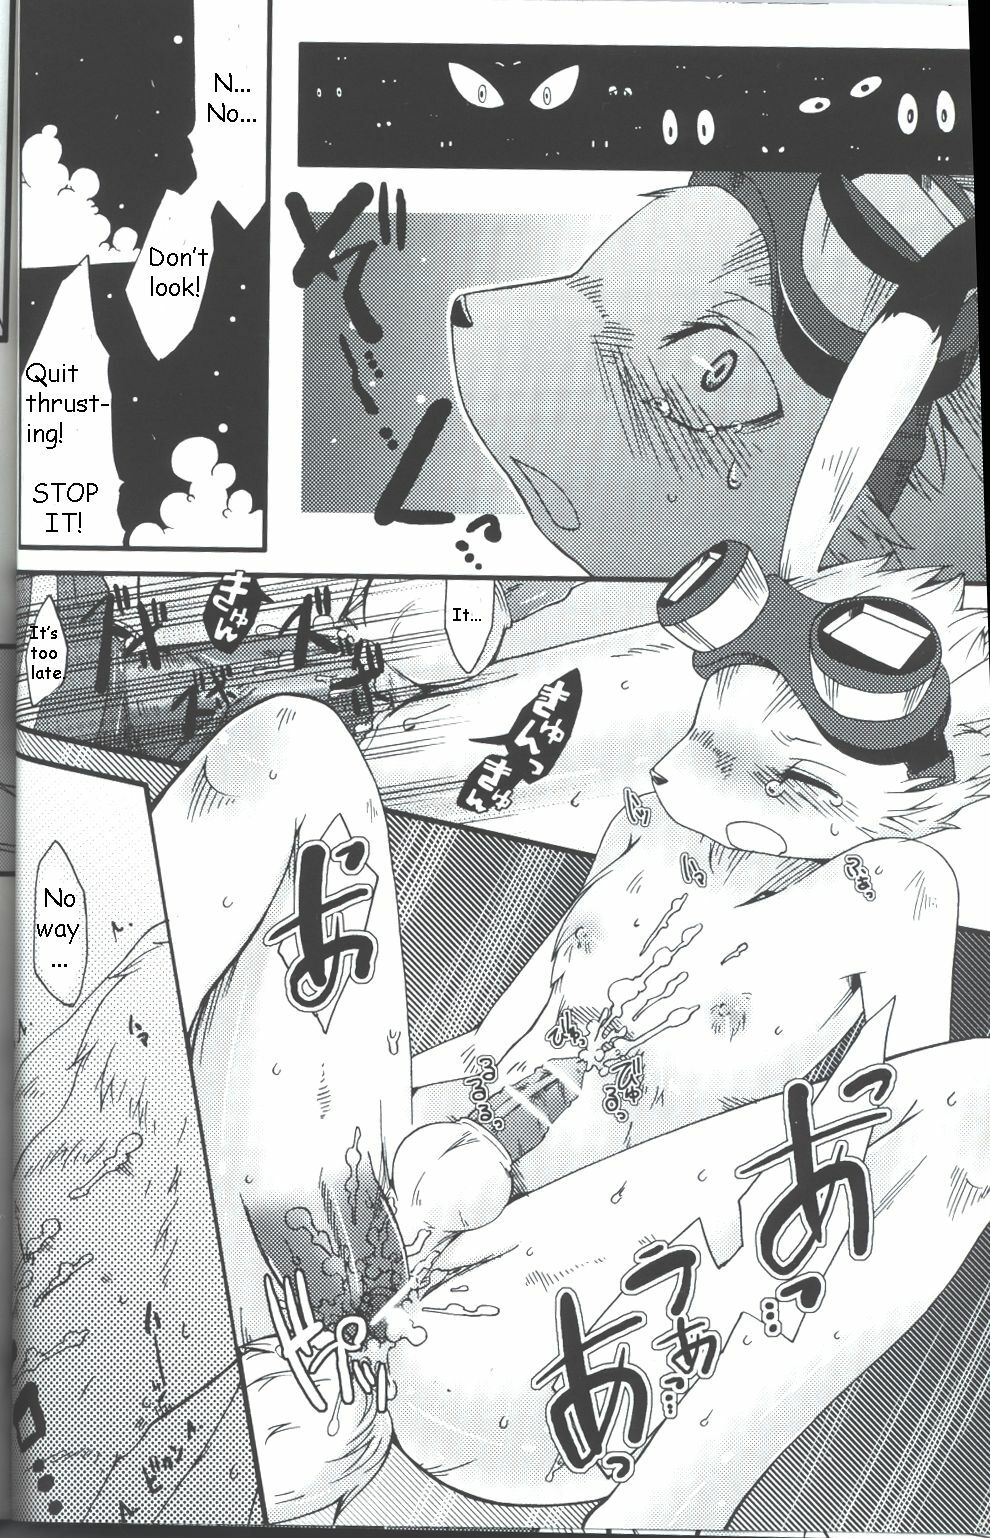 [Dogear (Inumimi Moeta)] Requirements of the King (Summer Wars) [English] page 16 full